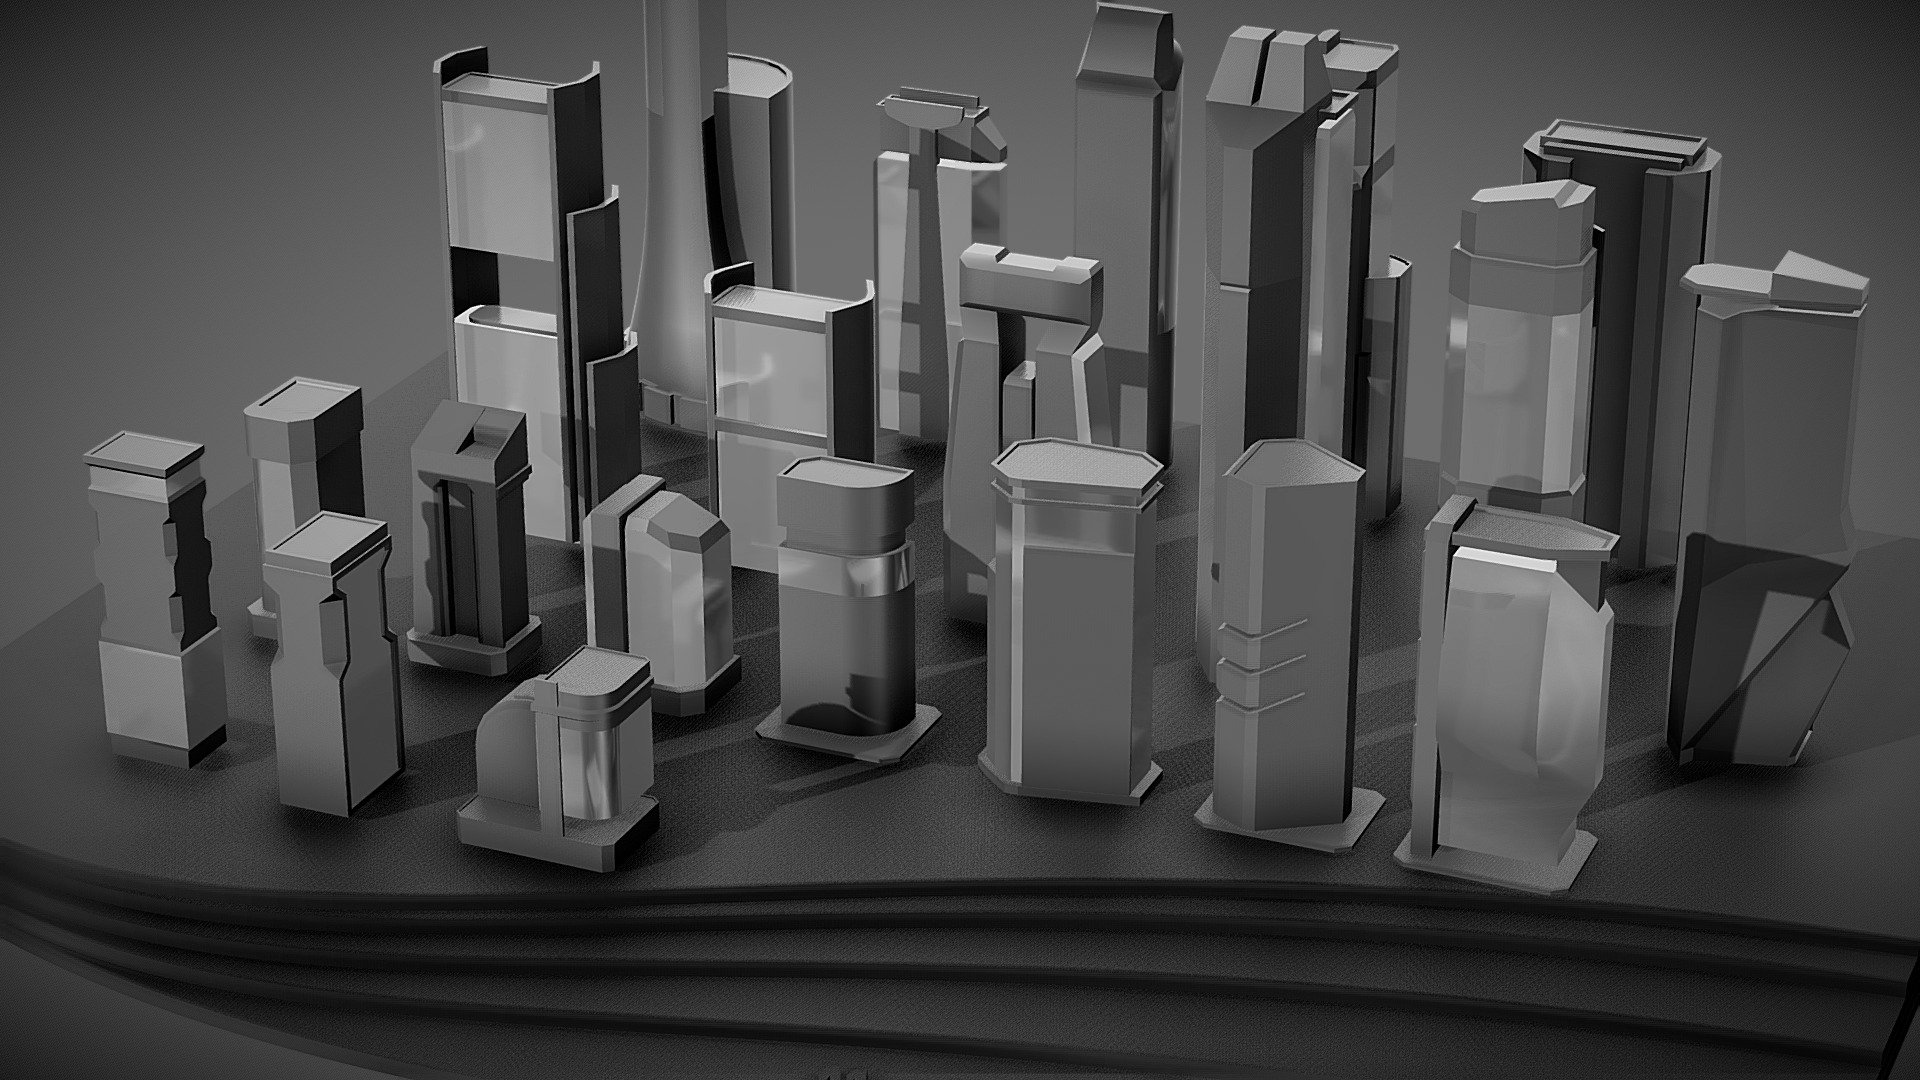 This pack includes 21 sample buildings for quick prototyping your projects and creating  city mockups. 

No Uvs
All origins aligned with ground for easy snapping.
Materials showcased here are for display purposes only, and results may vary significantly depending on your final application.  - Mockup Buildings for Maquette / Prototyping - Buy Royalty Free 3D model by Luís Cherubini (@luischerub) 3d model